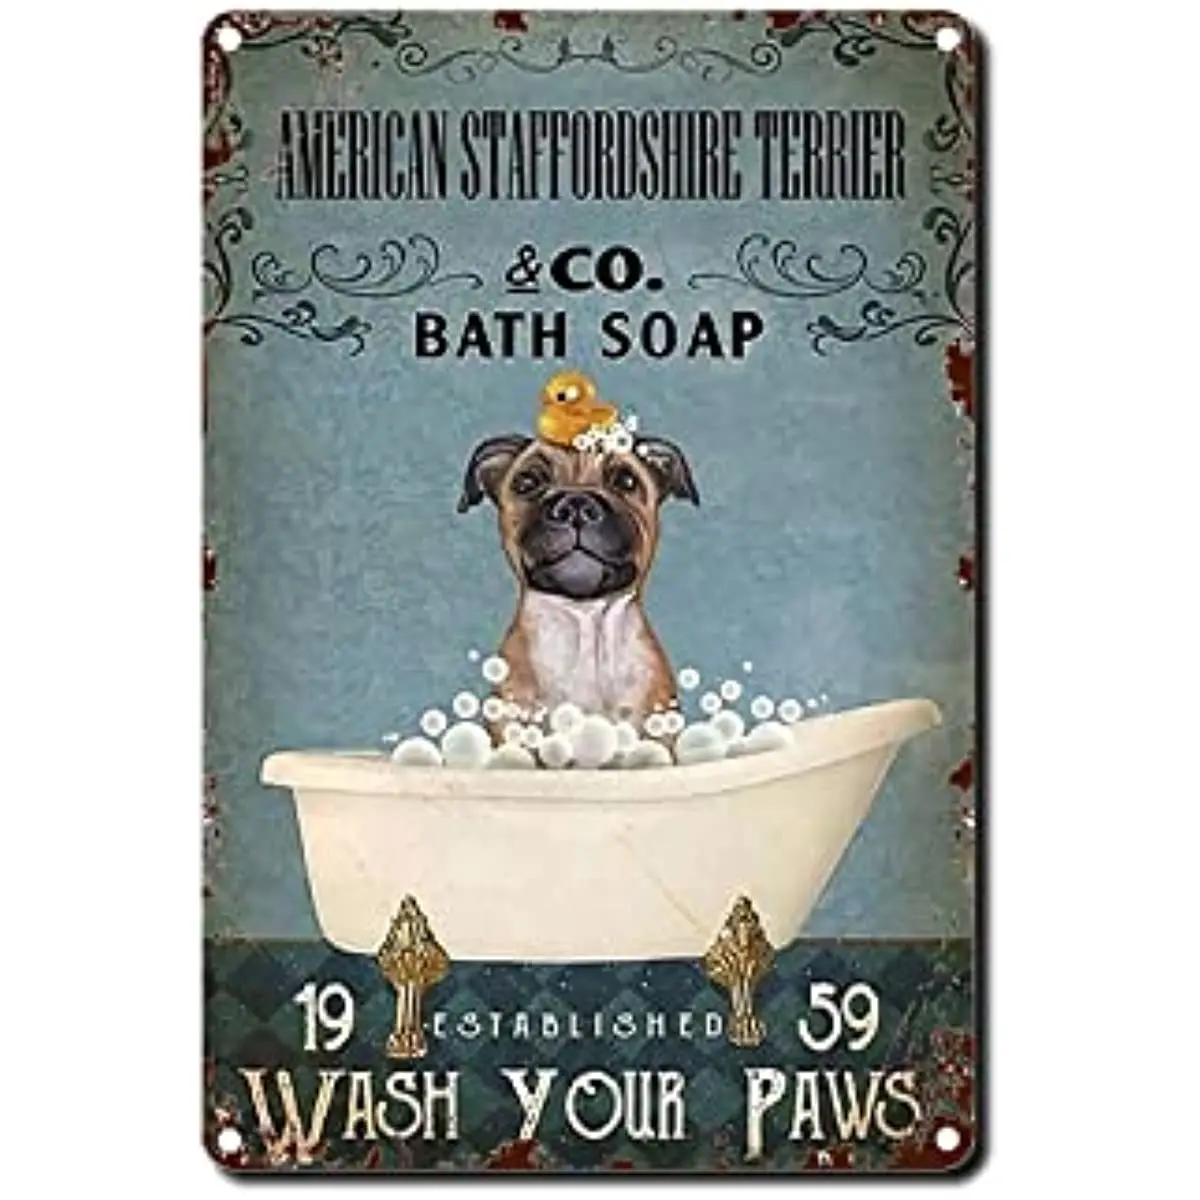 

New Tin Sign Wash Your Hooves Farmhouse American Terrier Dog Bathroom Funny Toilet Wall Art Decor Vintage Metal Tin Sign